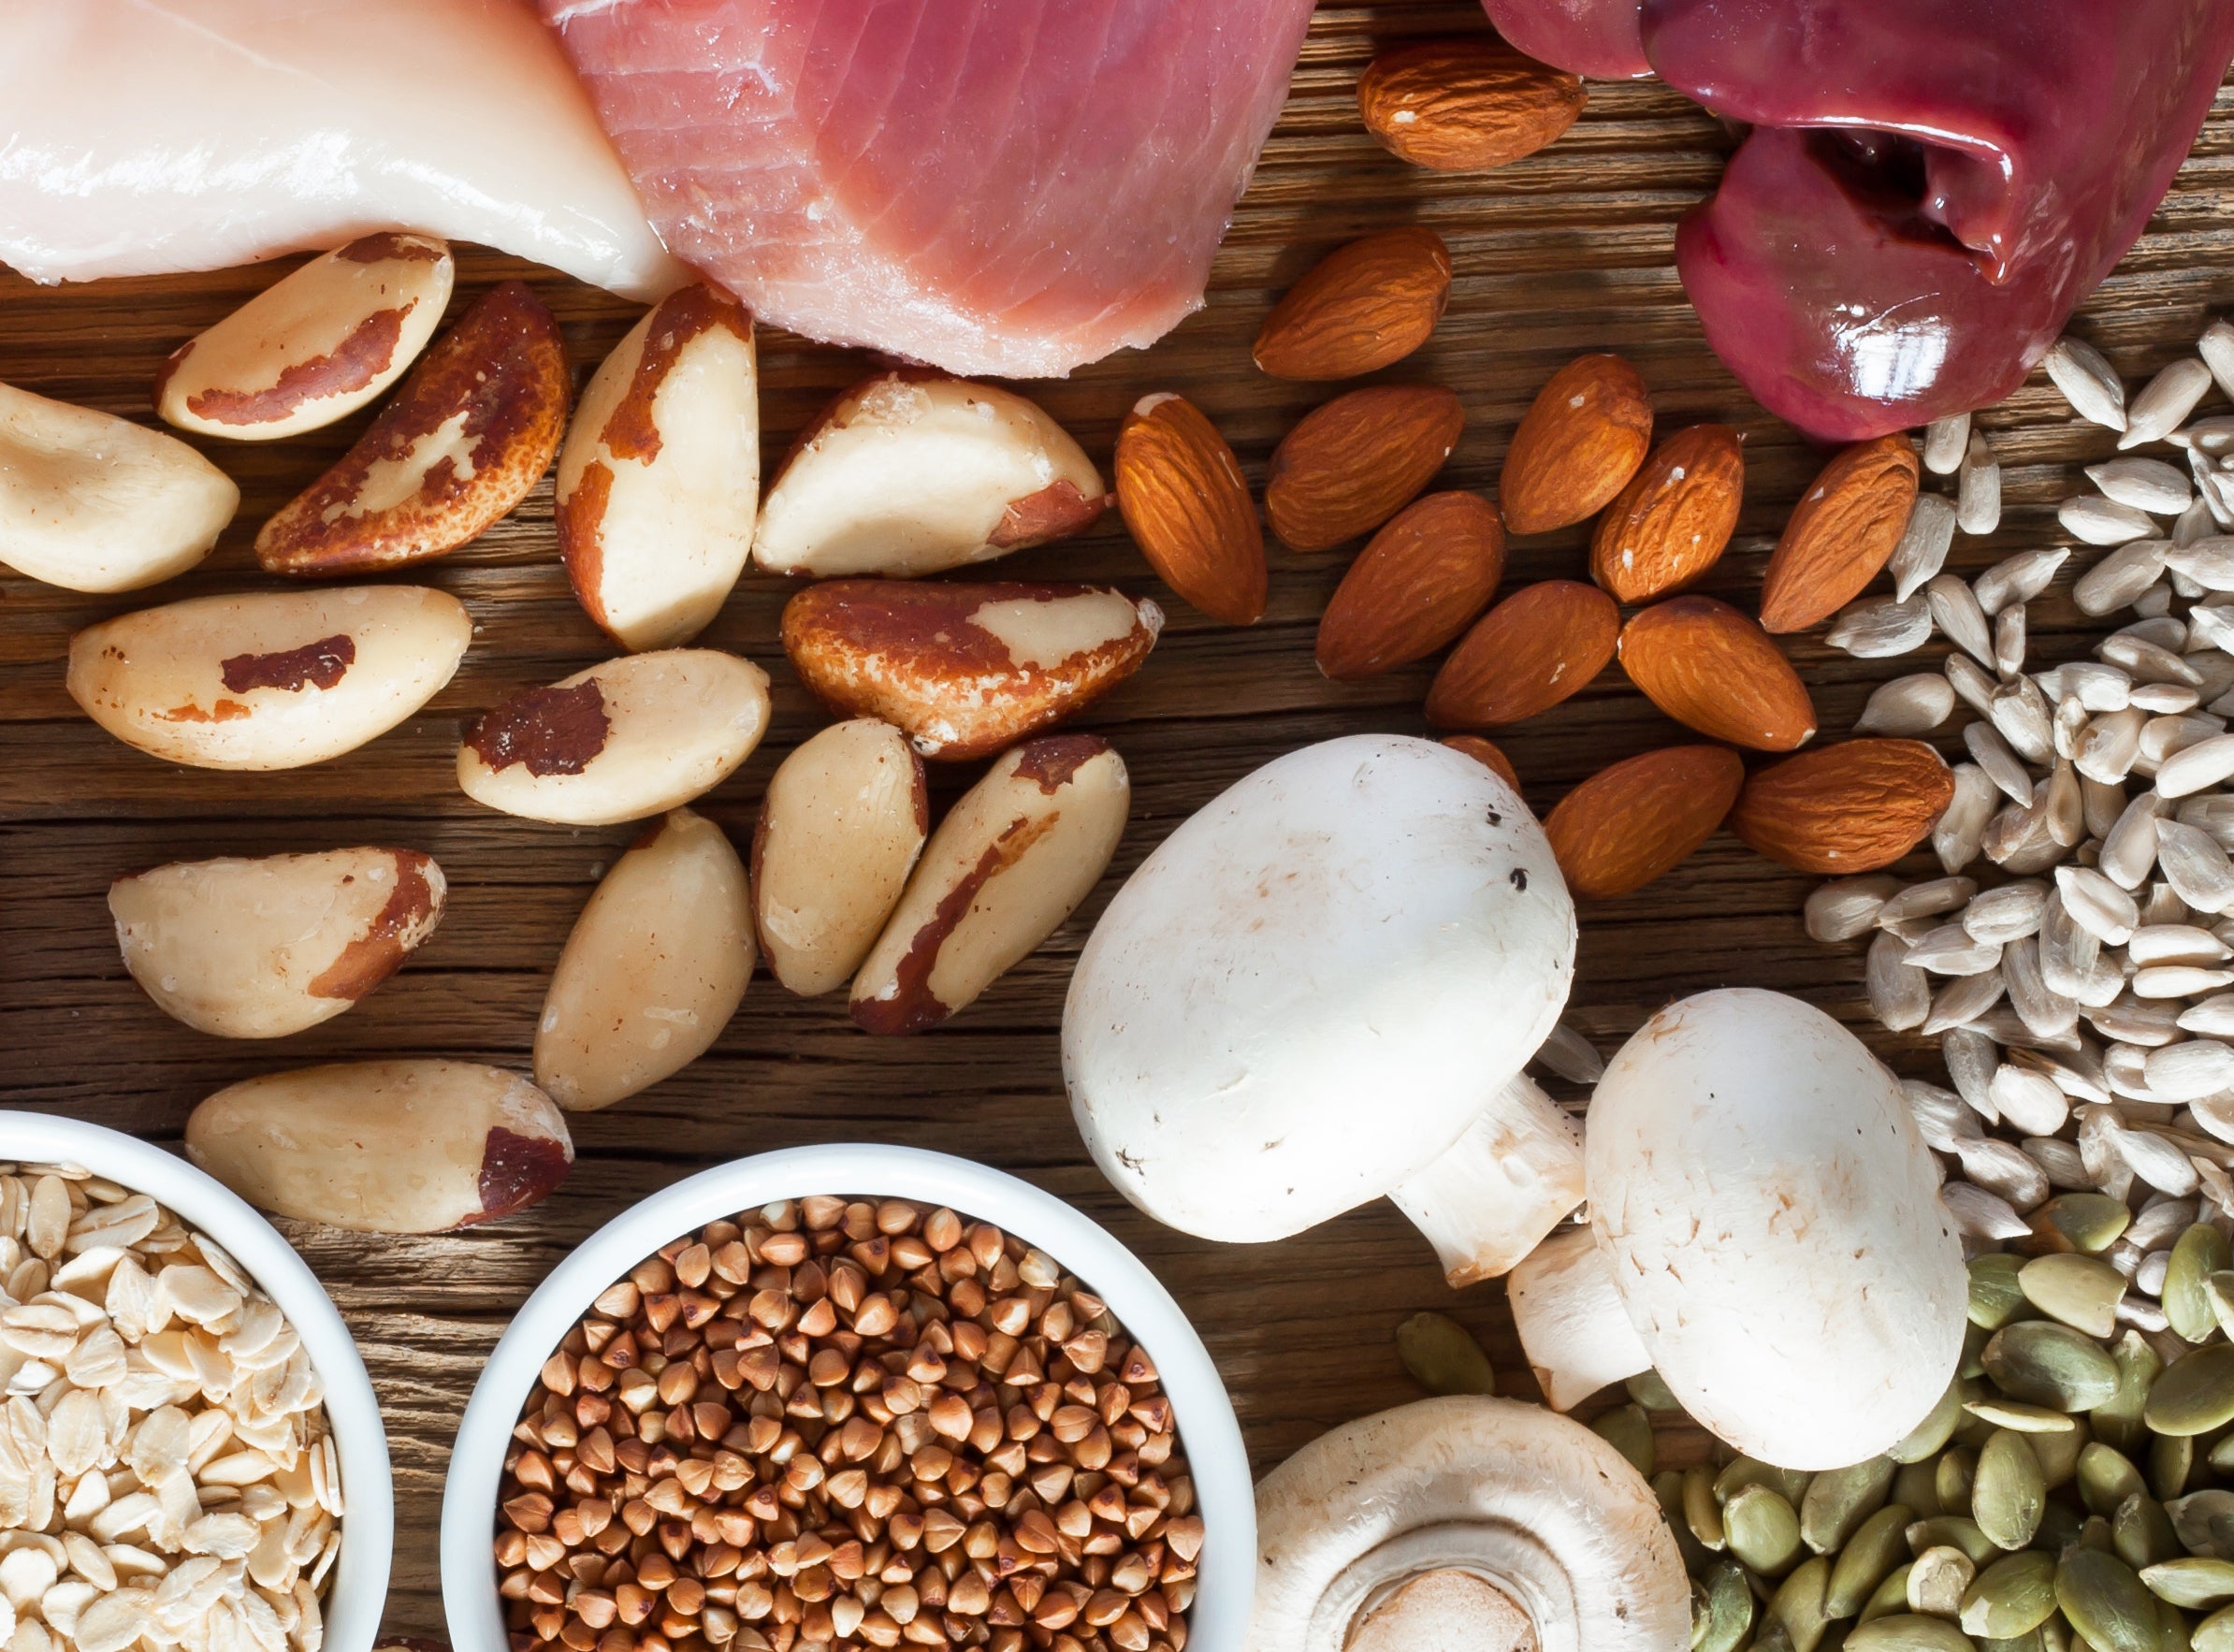 Foods high in vitamin b12 or pantothenic acid, including mushrooms, nuts (such as almonds, brazil nuts) pumpkin seeds, sunflower seeds, liver, poultry, fortified grains